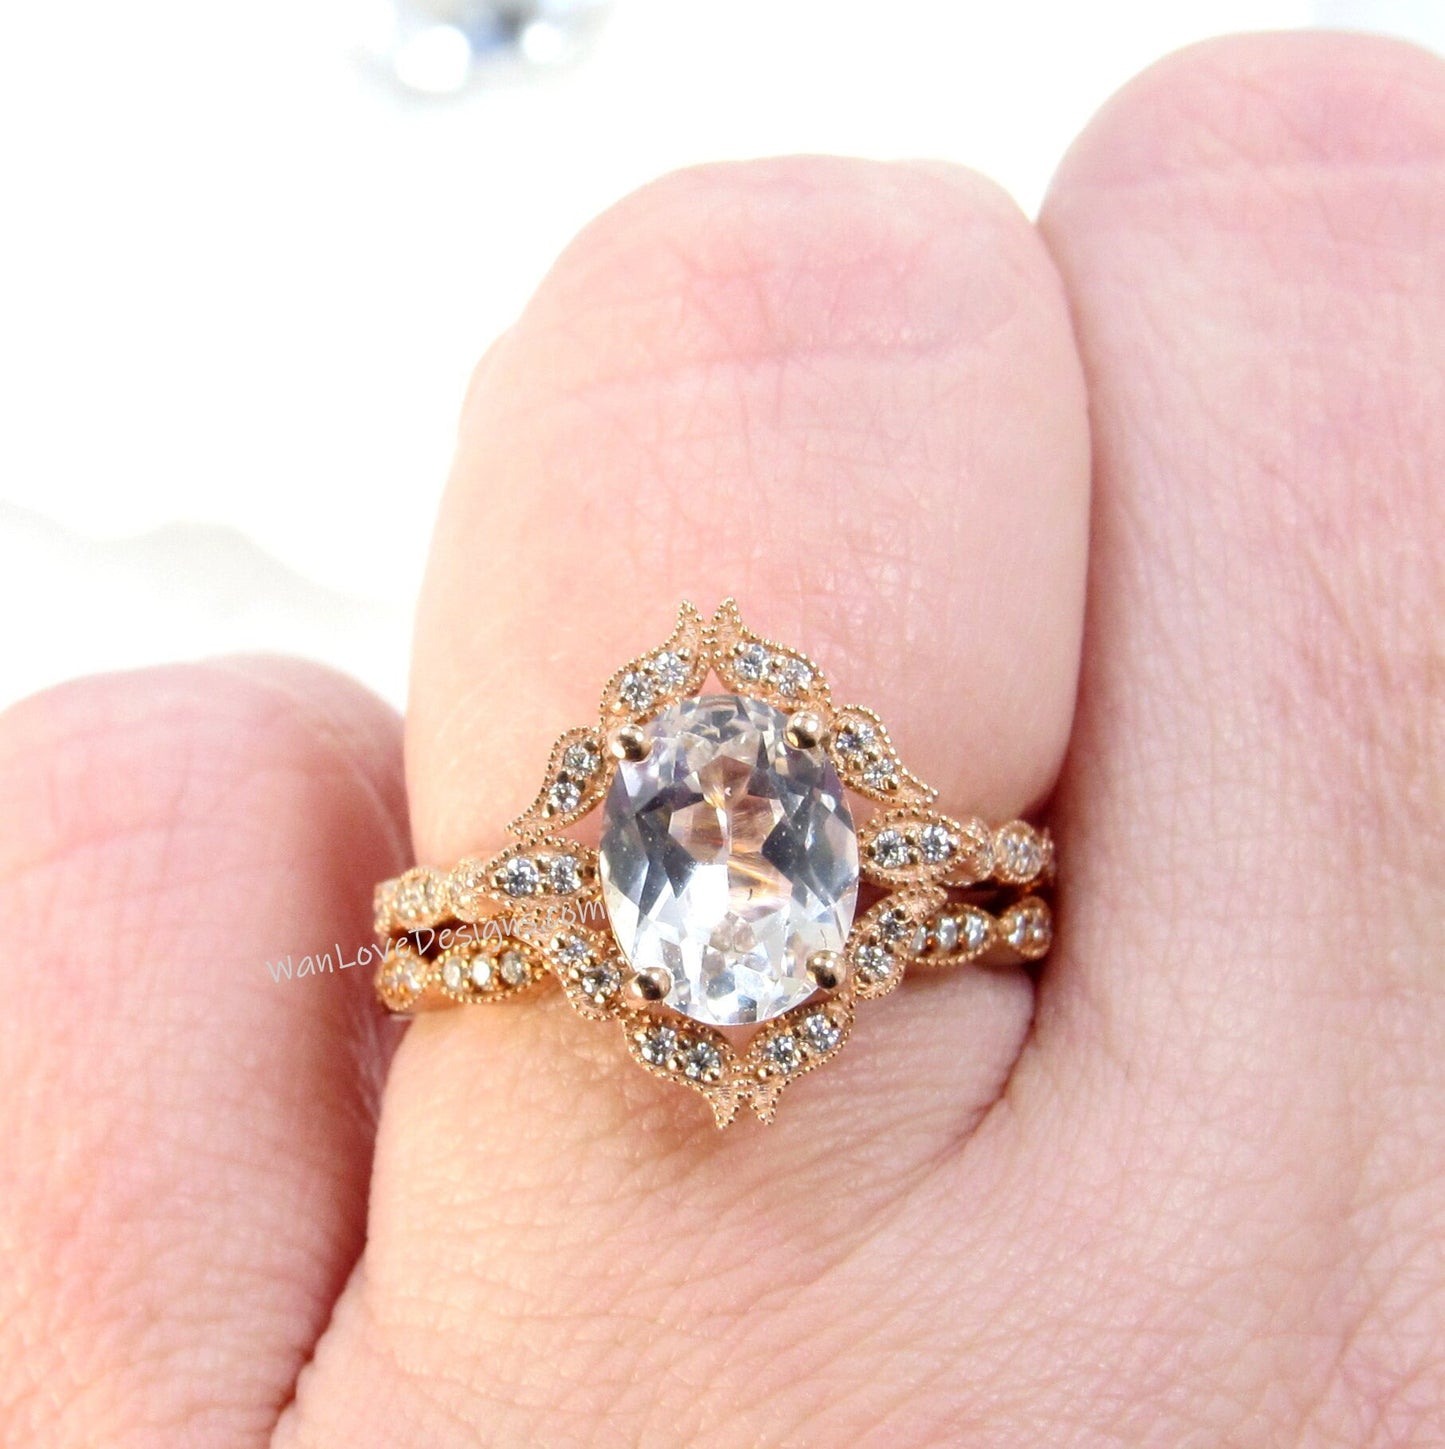 White Sapphire vintage engagement ring set Rose gold moissanite halo ring Antique almost eternity matching wedding band Bridal Promise Ready